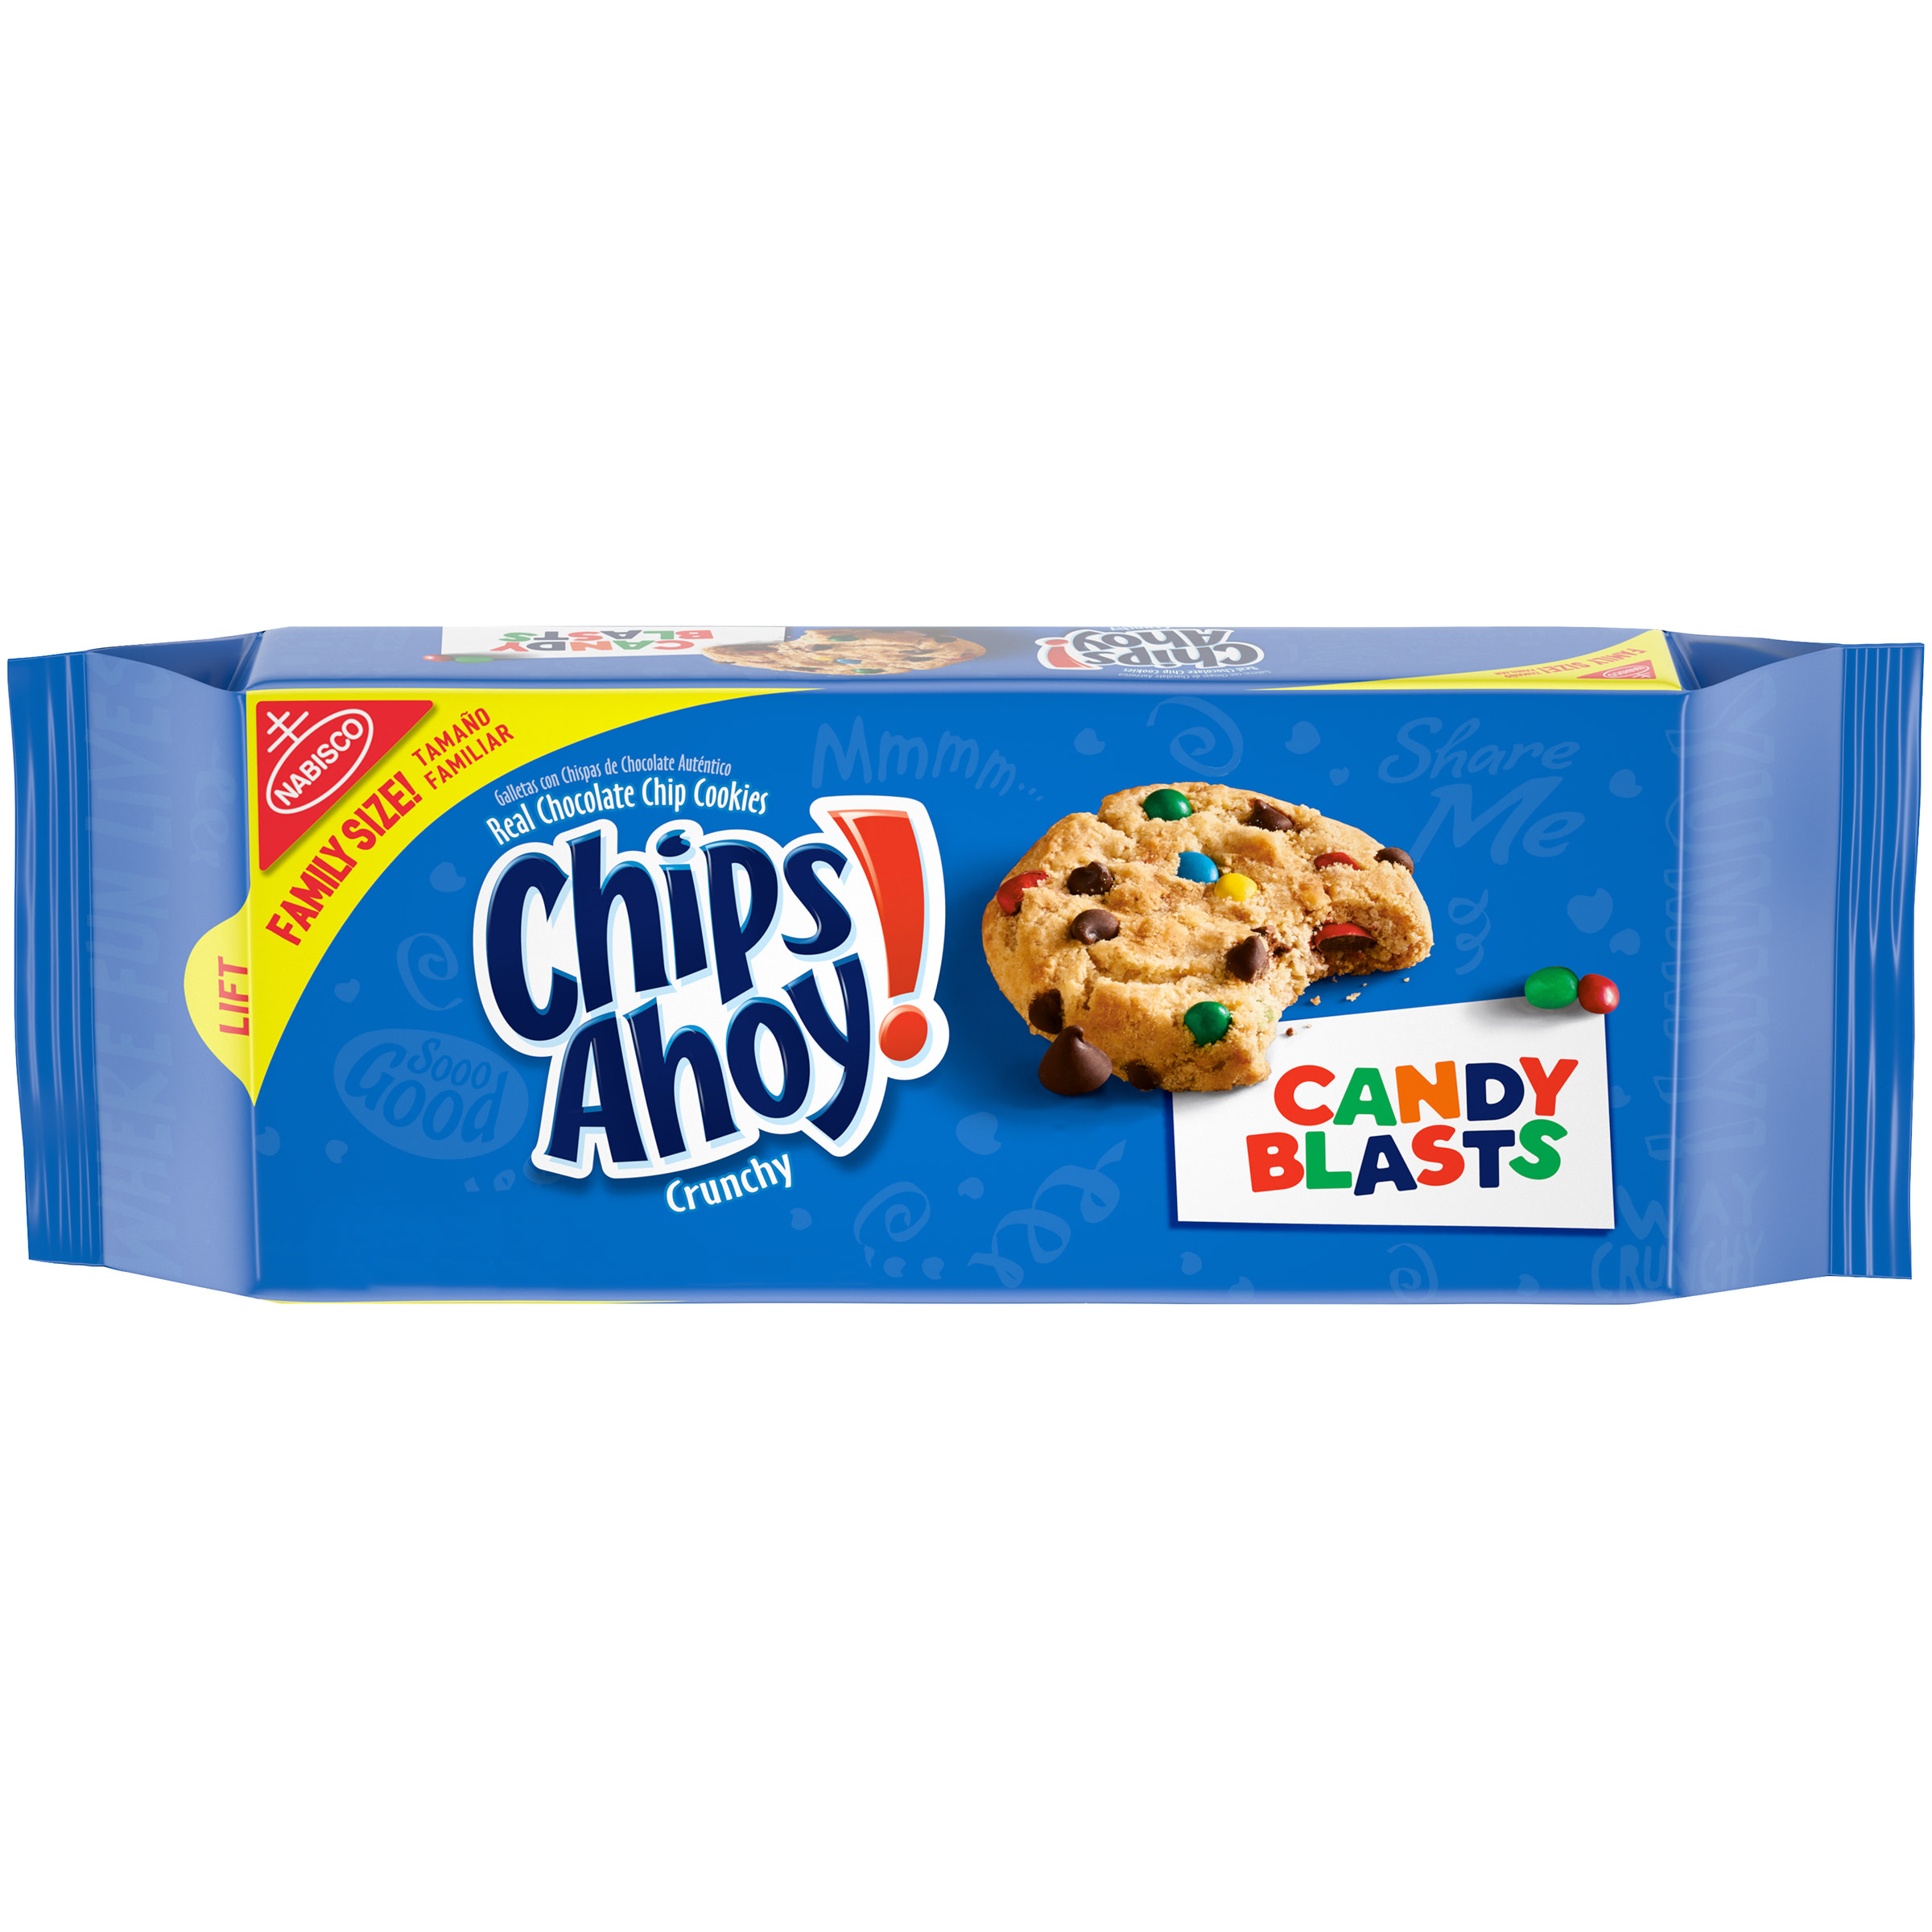 CHIPS AHOY! Candy Blast Family Size Cookies, 18.9 oz - image 1 of 13